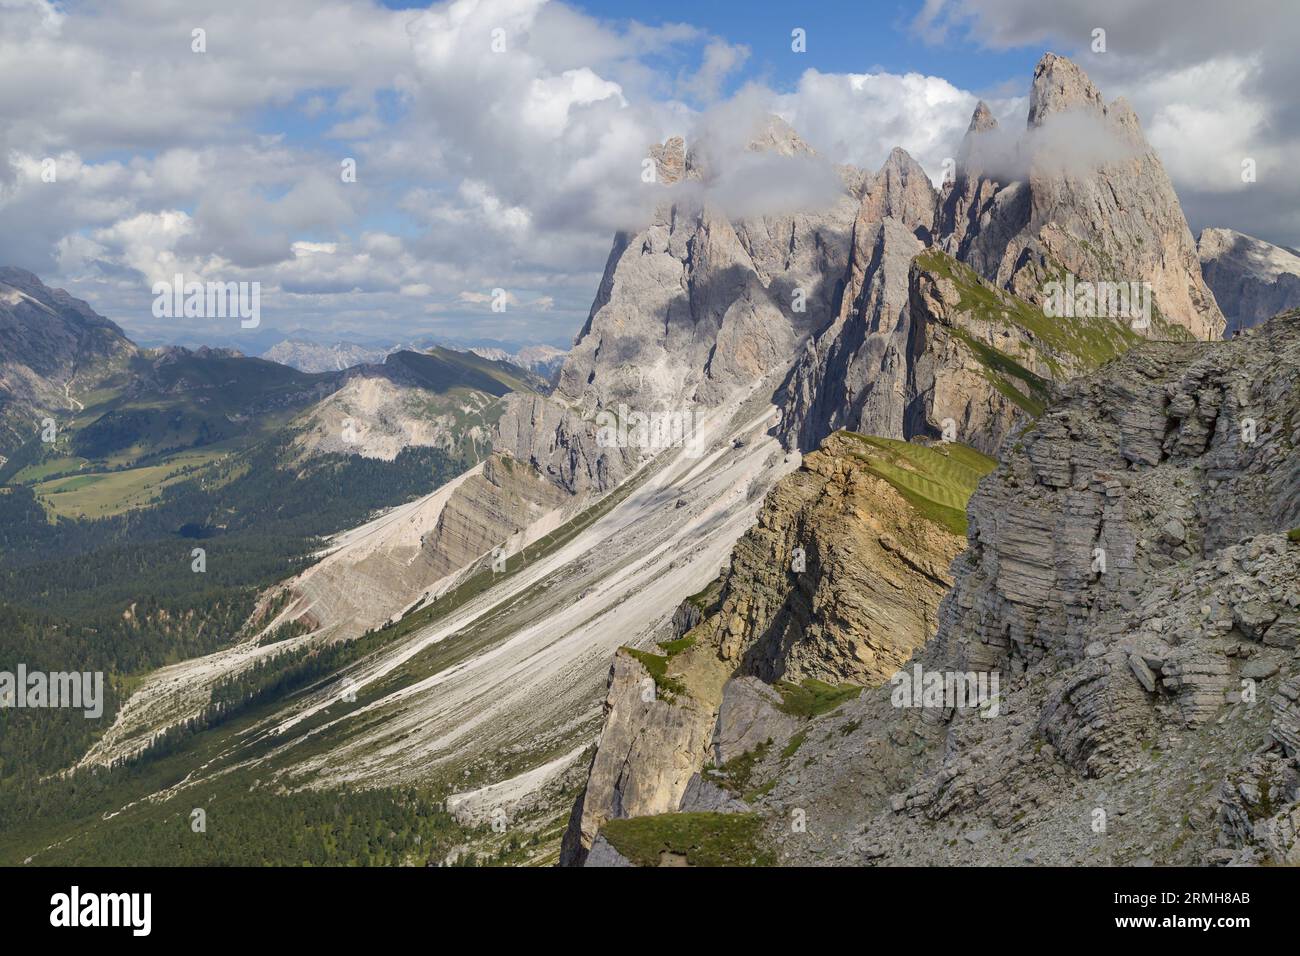 Gruppo delle Odle from Seceda, South Tyrol, Italy. Stock Photo